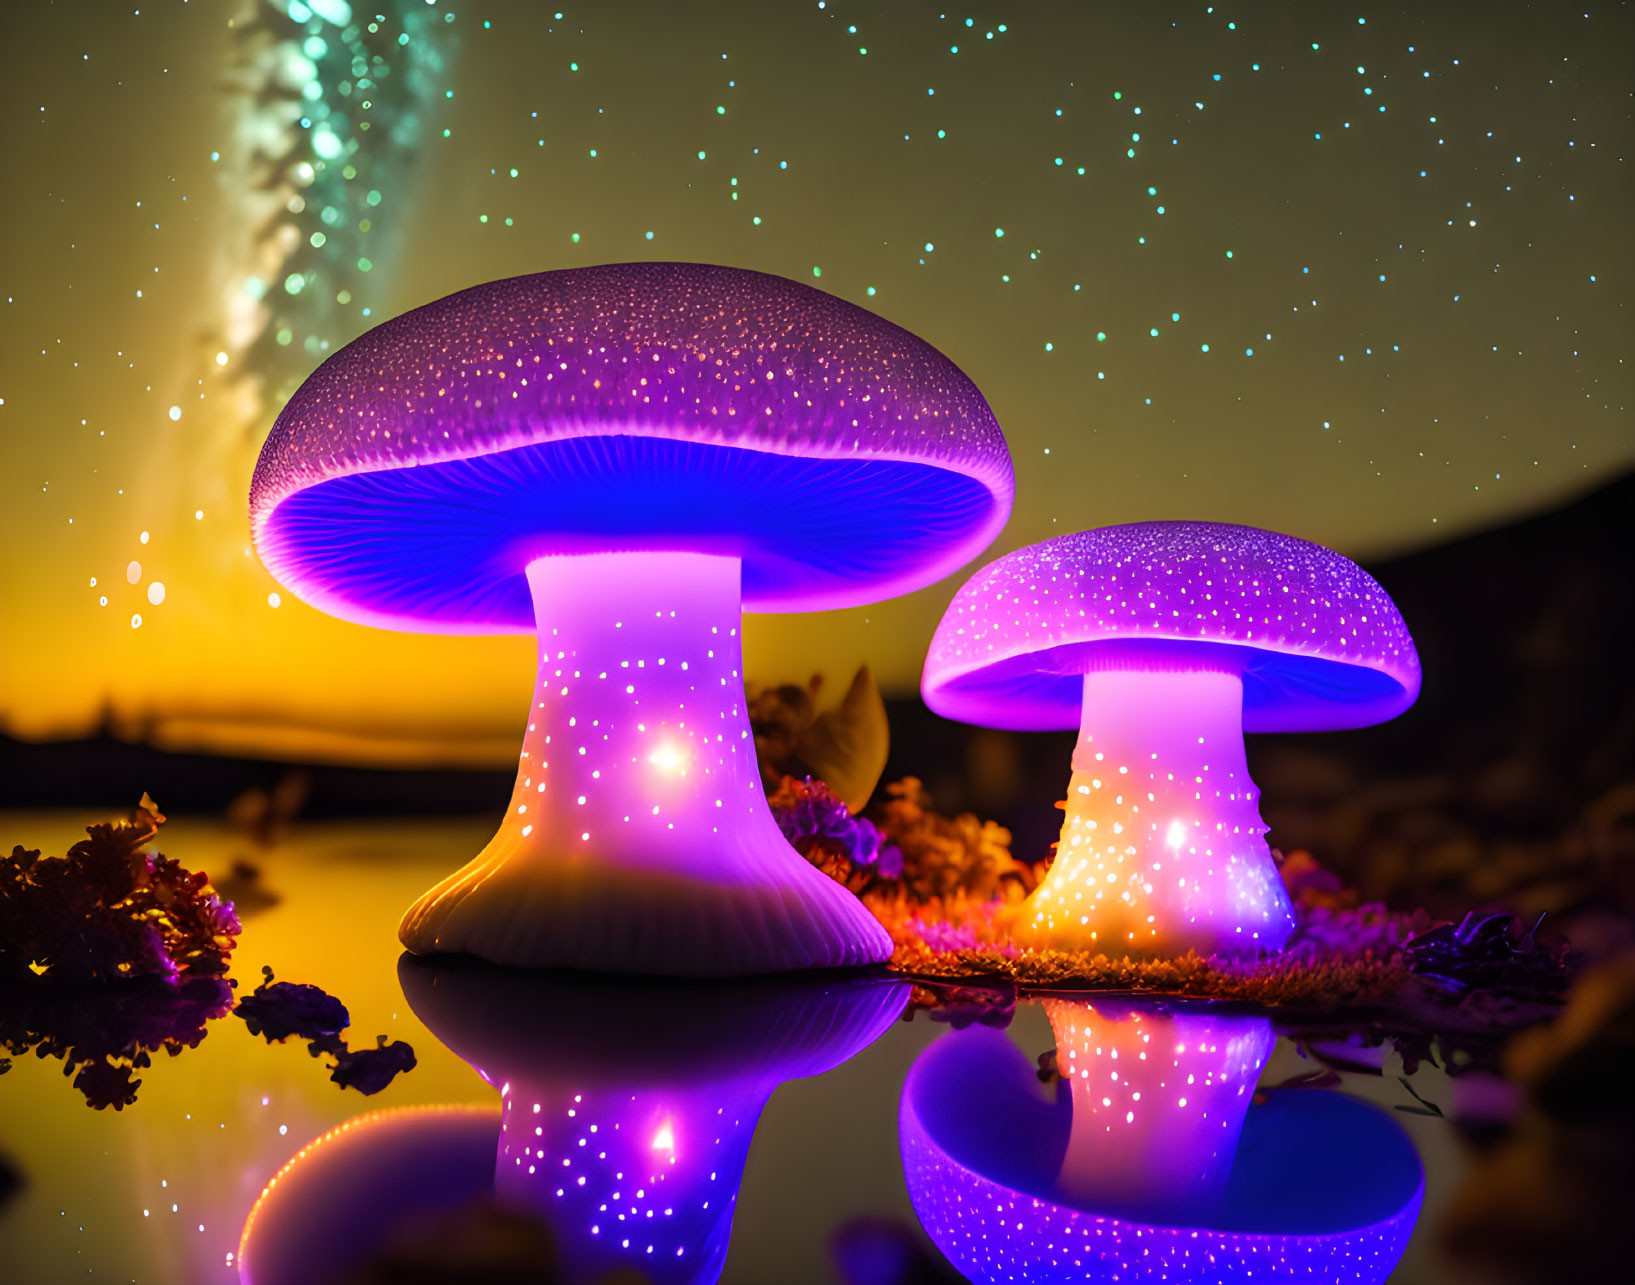 Glowing fantasy mushrooms with starry night sky and celestial event reflected on water